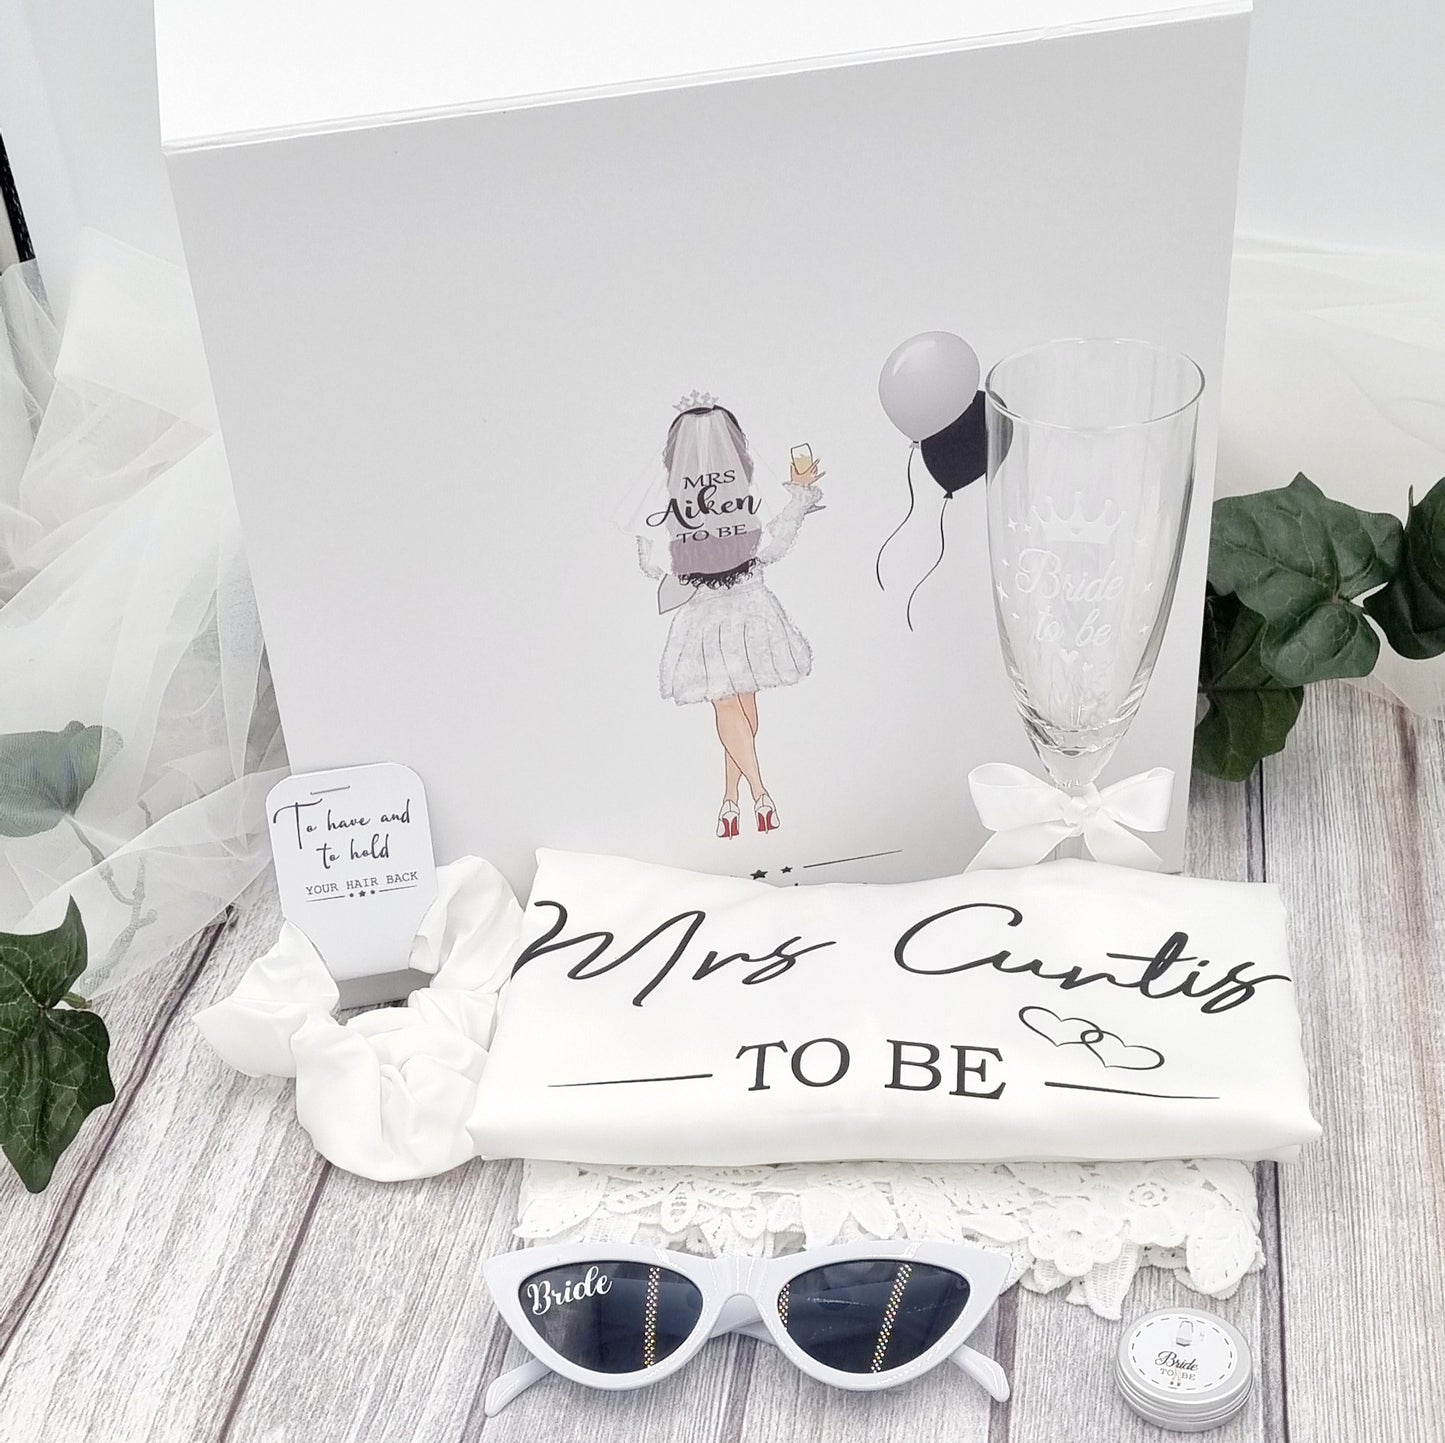 Bride to be gift set with personalised gift box, white robe, white sunglsses, lip balm and scrunchie 